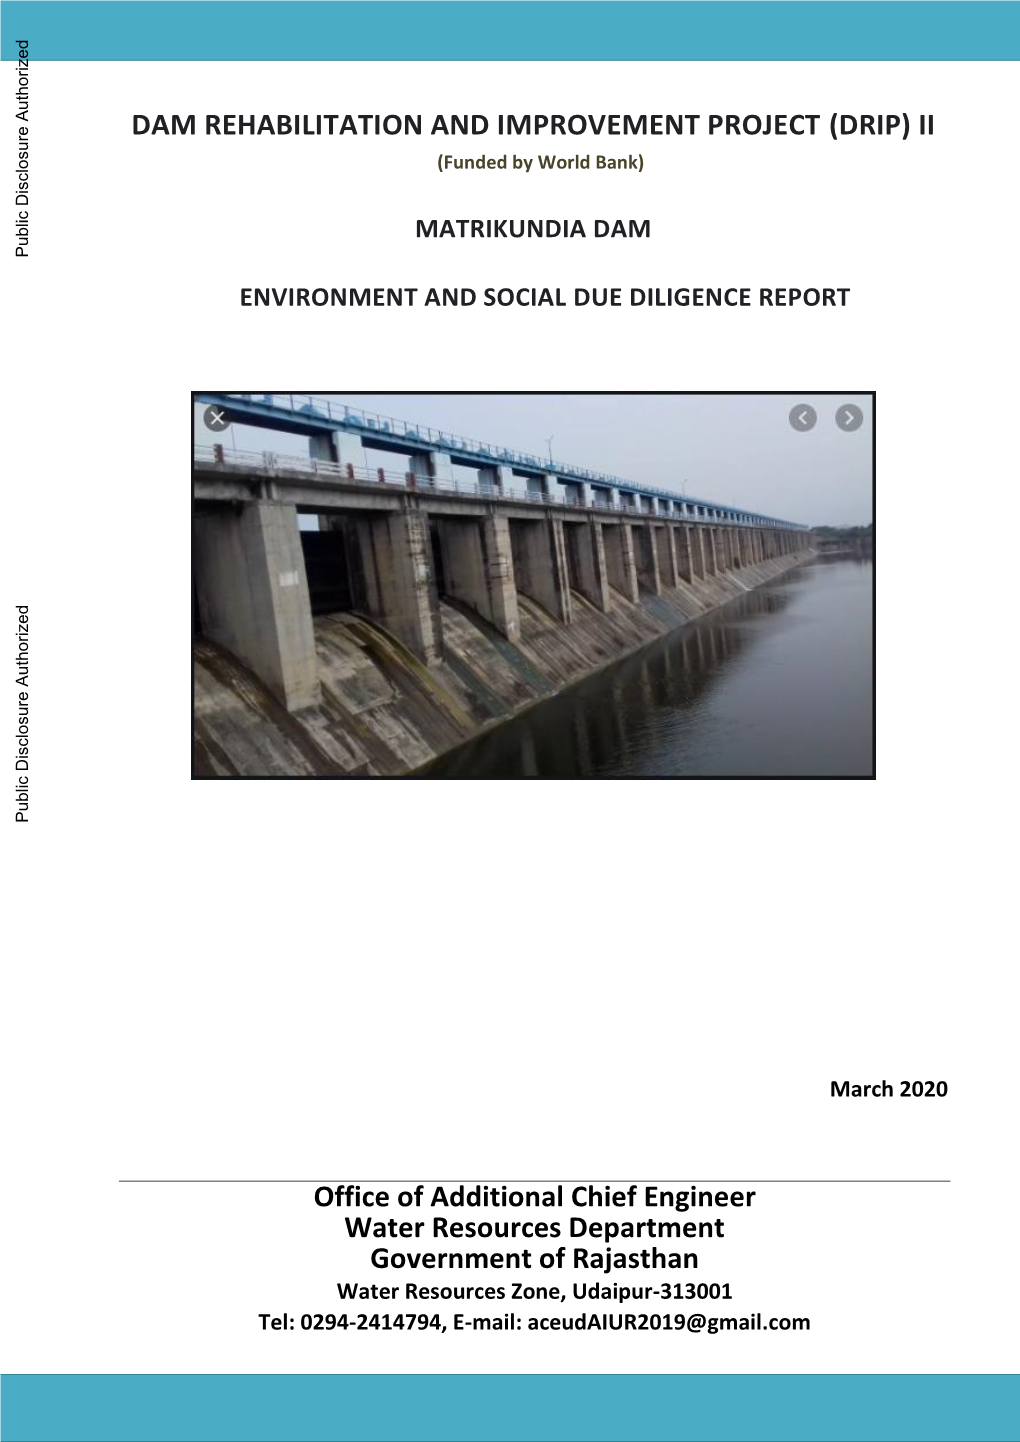 DAM REHABILITATION and IMPROVEMENT PROJECT (DRIP) II (Funded by World Bank)